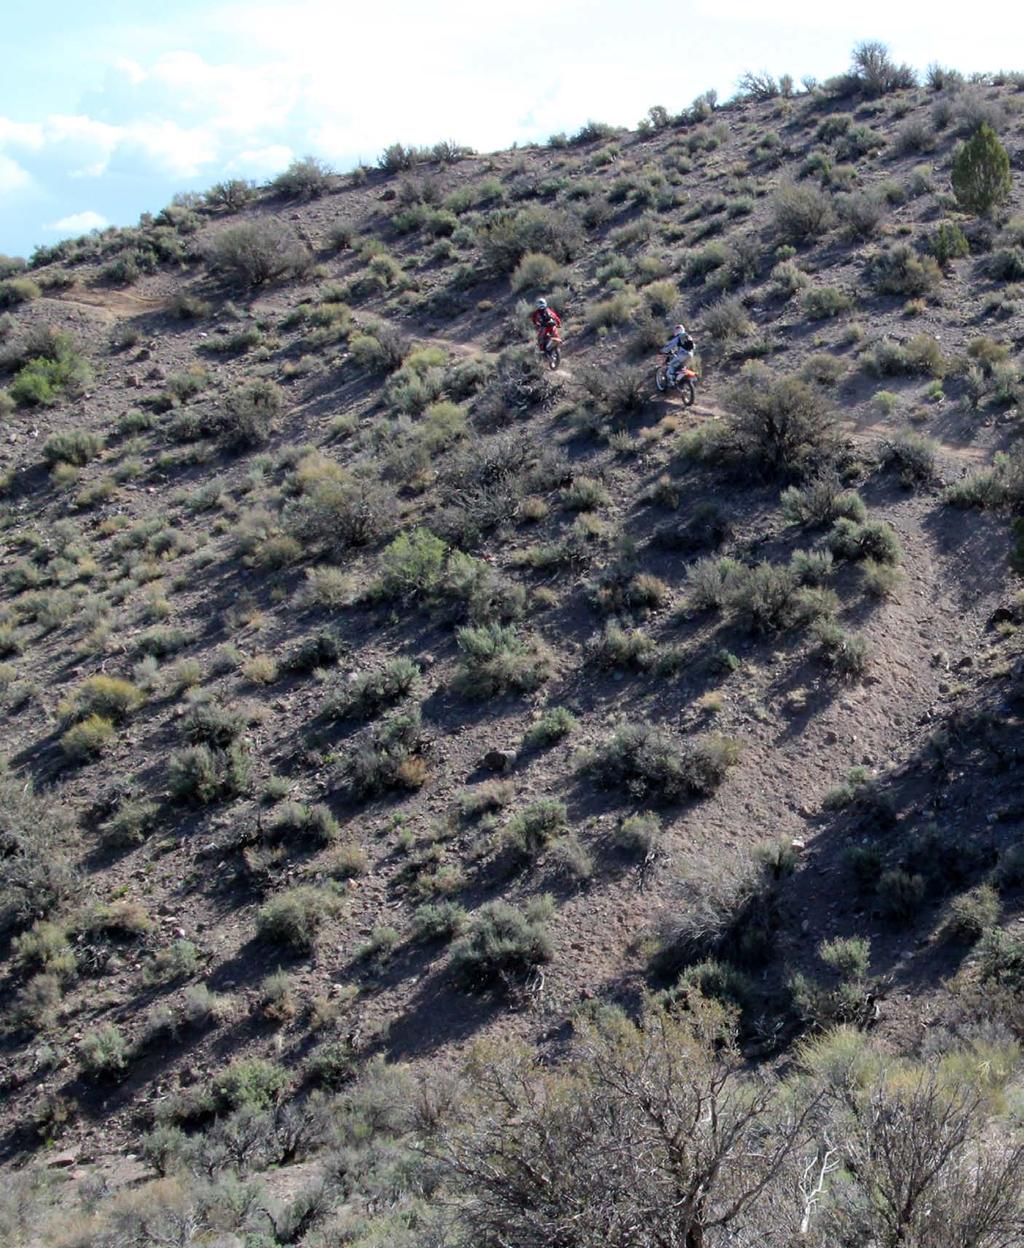 FEATURE 30TH ANNUAL MOTION PRO NEVADA 200 TRAIL RIDE P96 Elevation changes